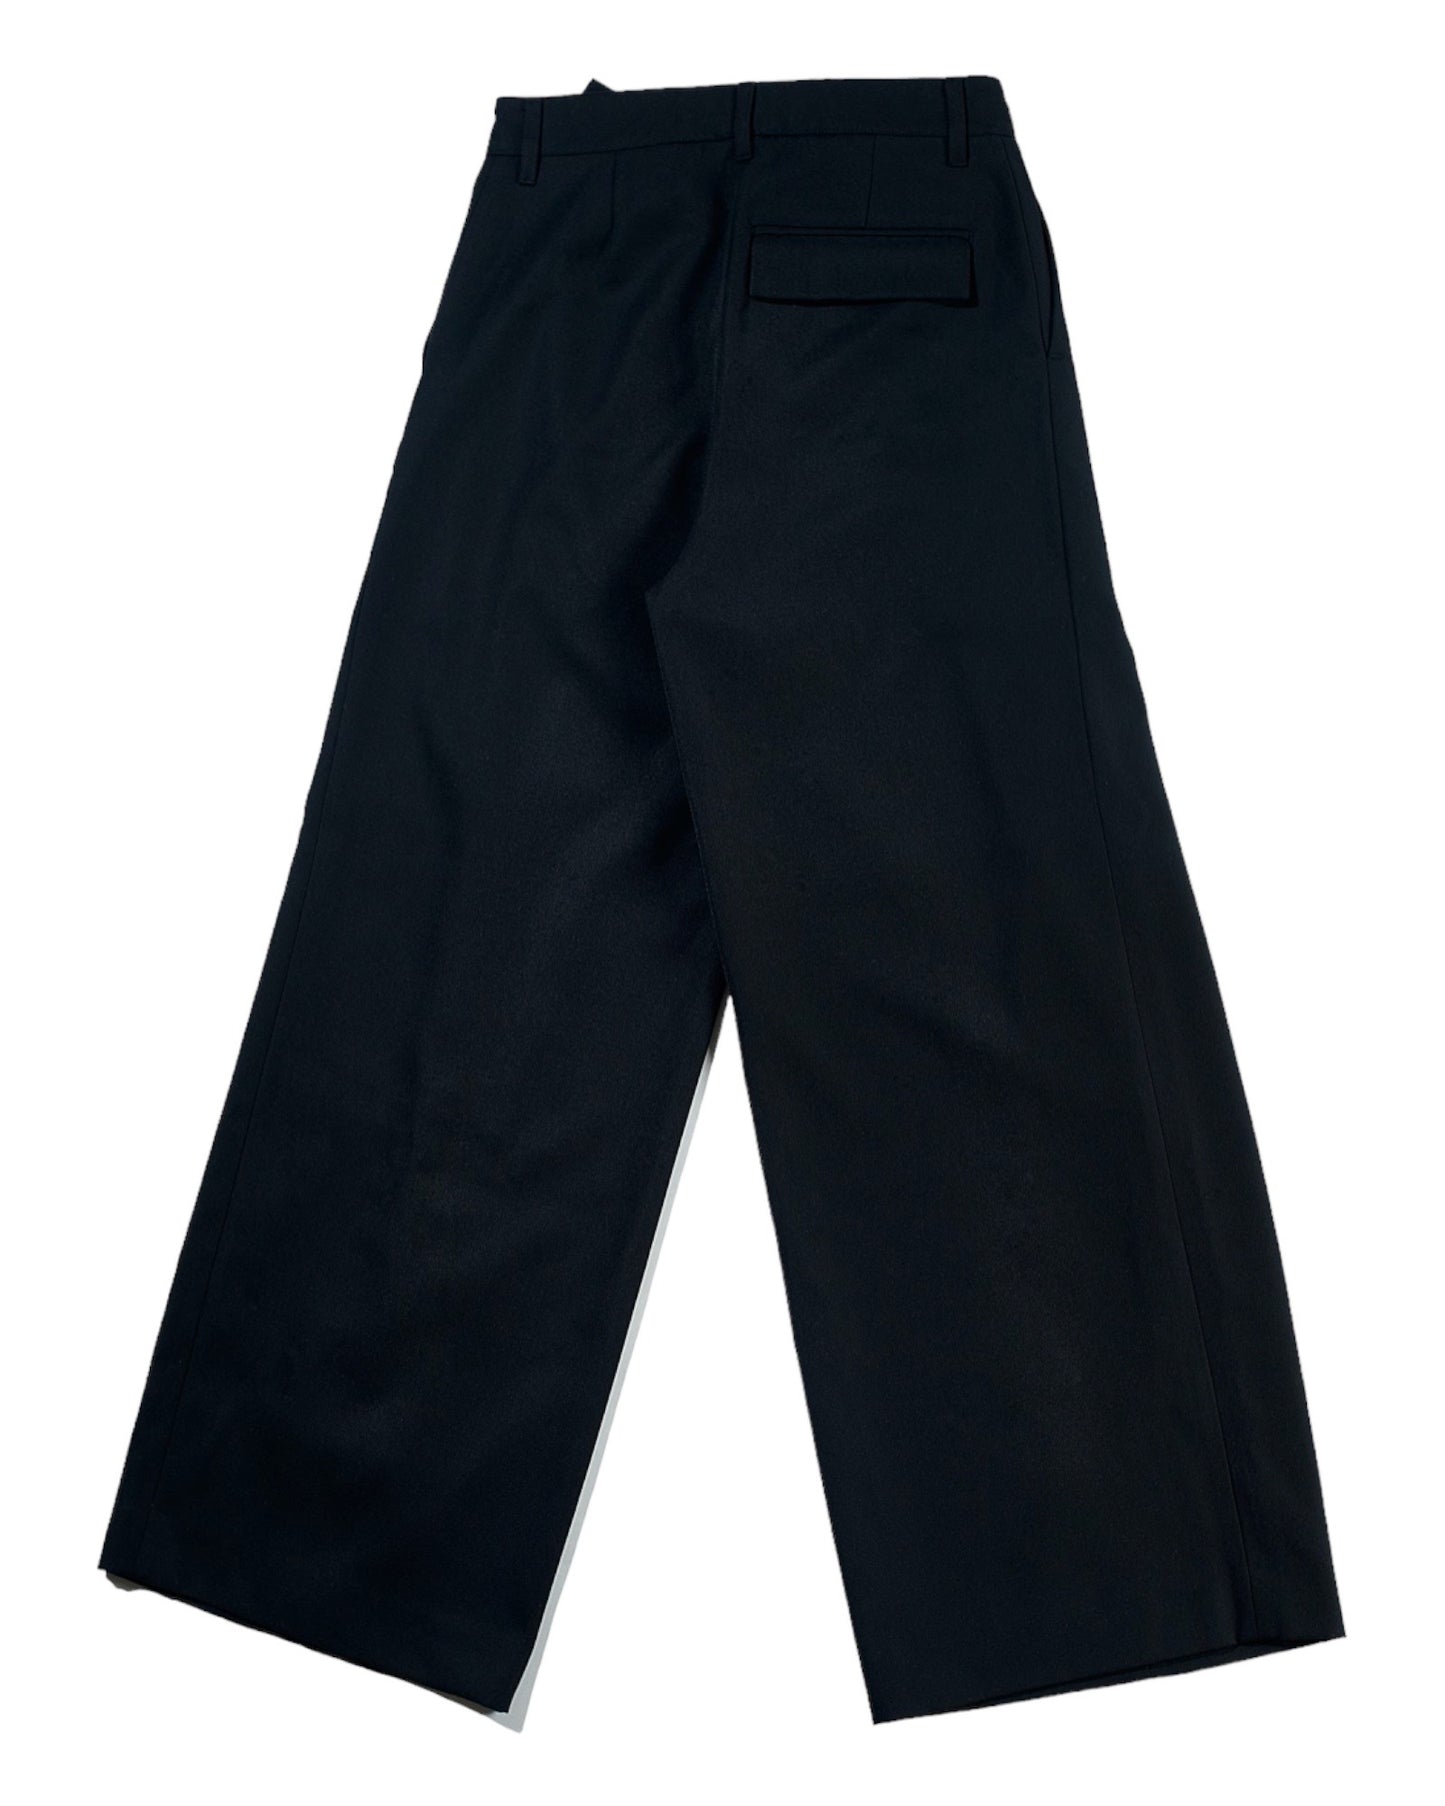 Black Shift Tailored Trousers